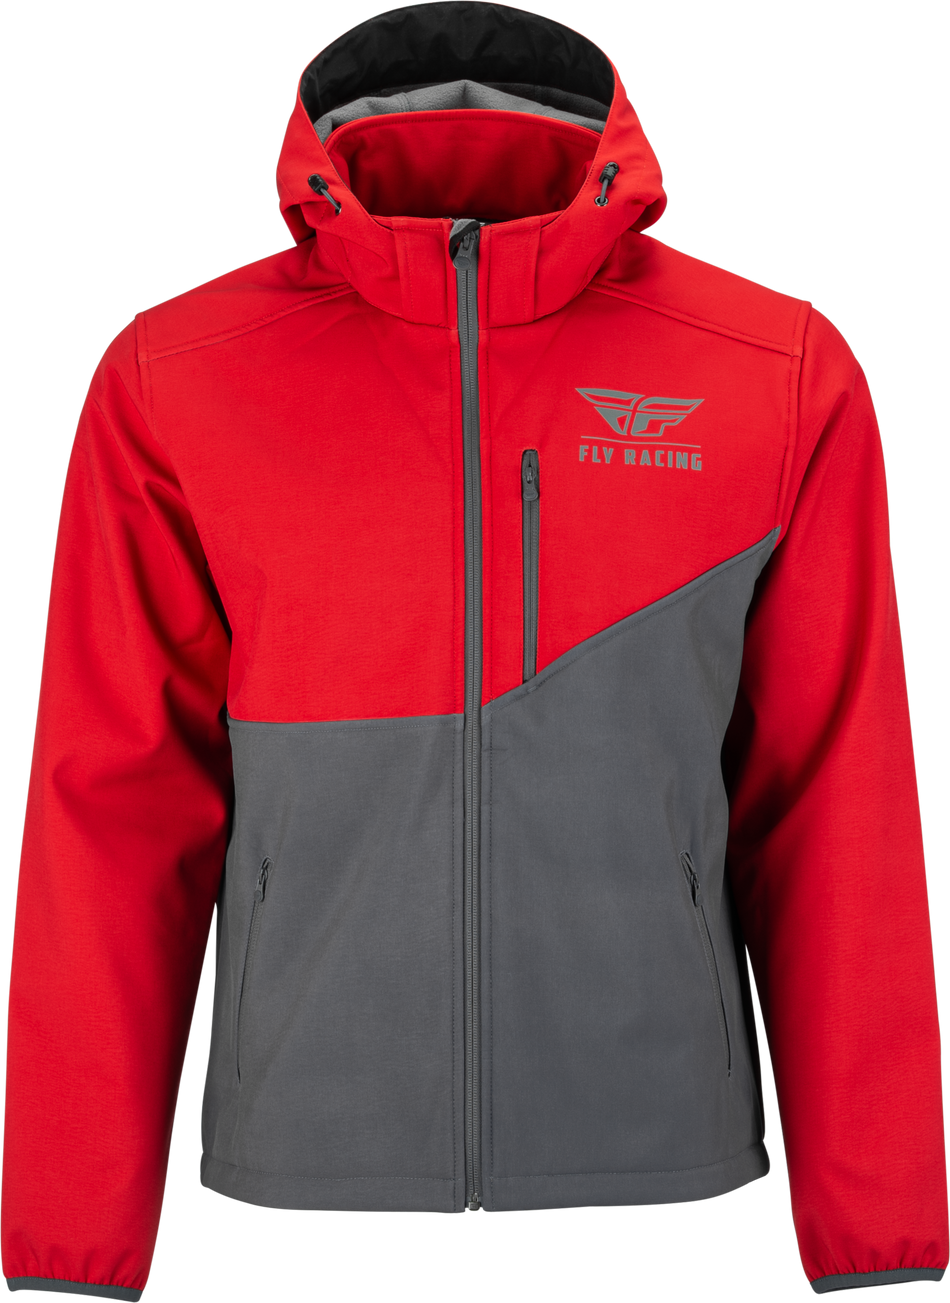 FLY RACING Checkpoint Jacket Grey/Red Md 354-6384M